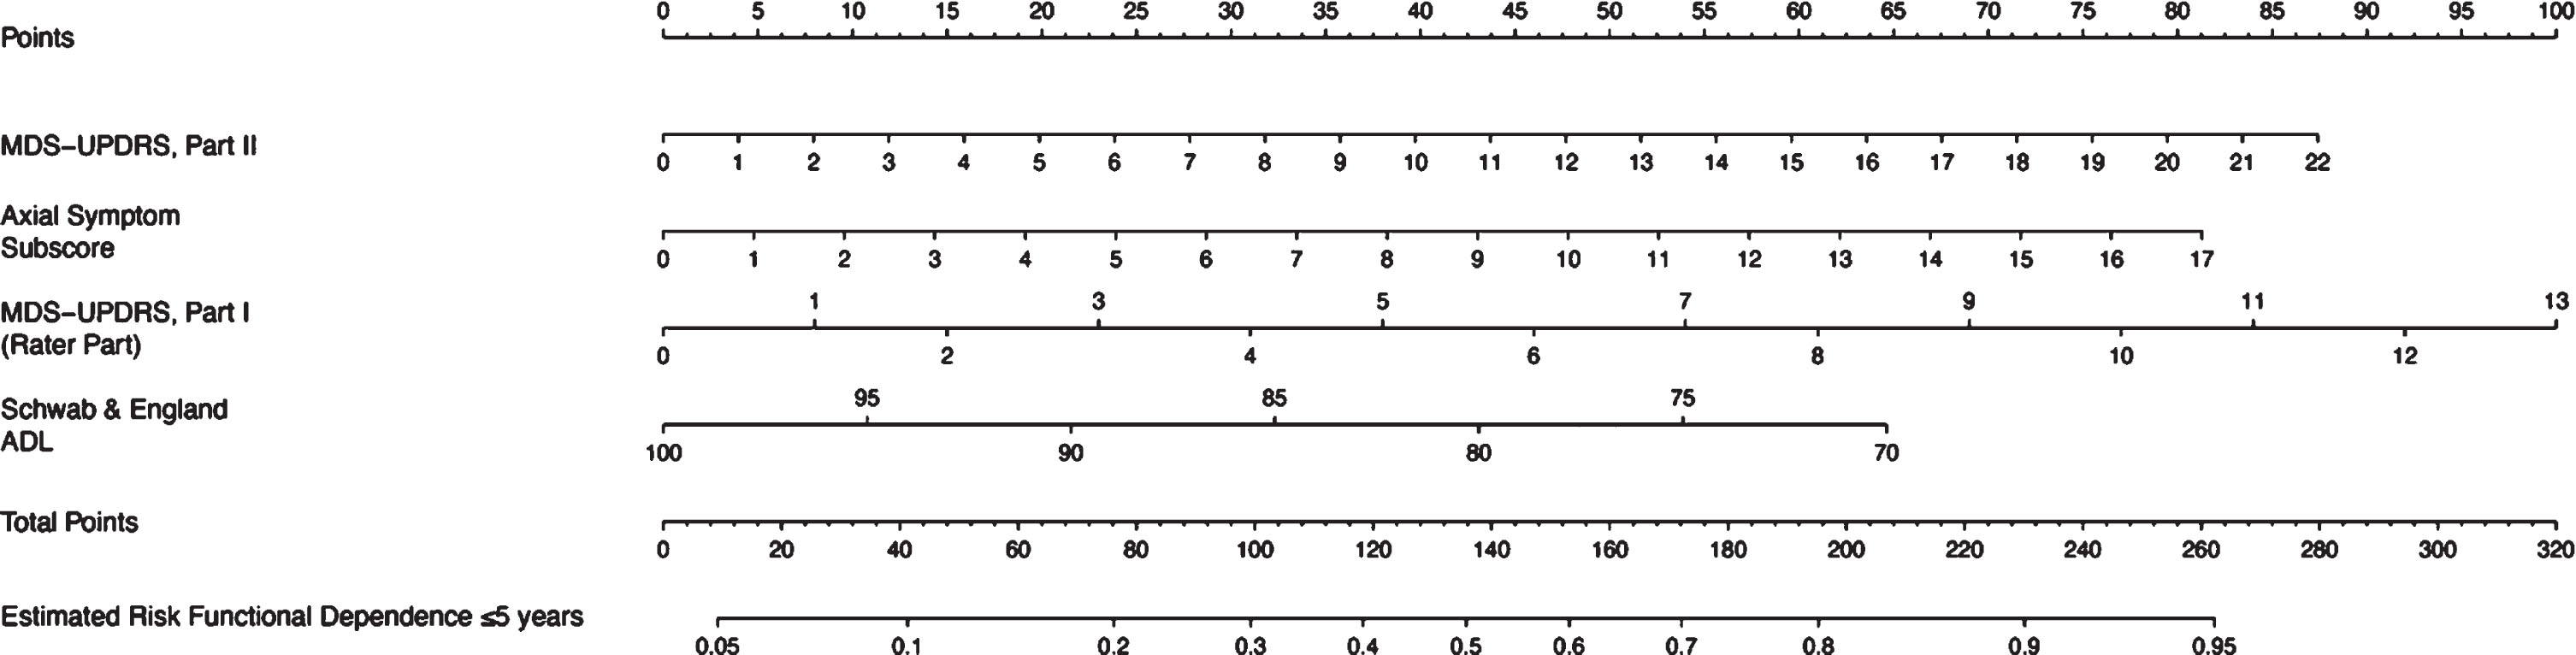 Nomogram for the prediction of functional dependence within 5 years. MDS-UPDRS, Movement Disorder Society-Unified Parkinson’s Disease Rating Scale; ADL, Activities of Daily Living. A nomogram model to predict functional dependence in early PD patients. Each associated factor is given a point value (total 100 points) which translates to a prognostic percentage of the likelihood that a patient will become functionally dependent within 5 years of diagnosis.